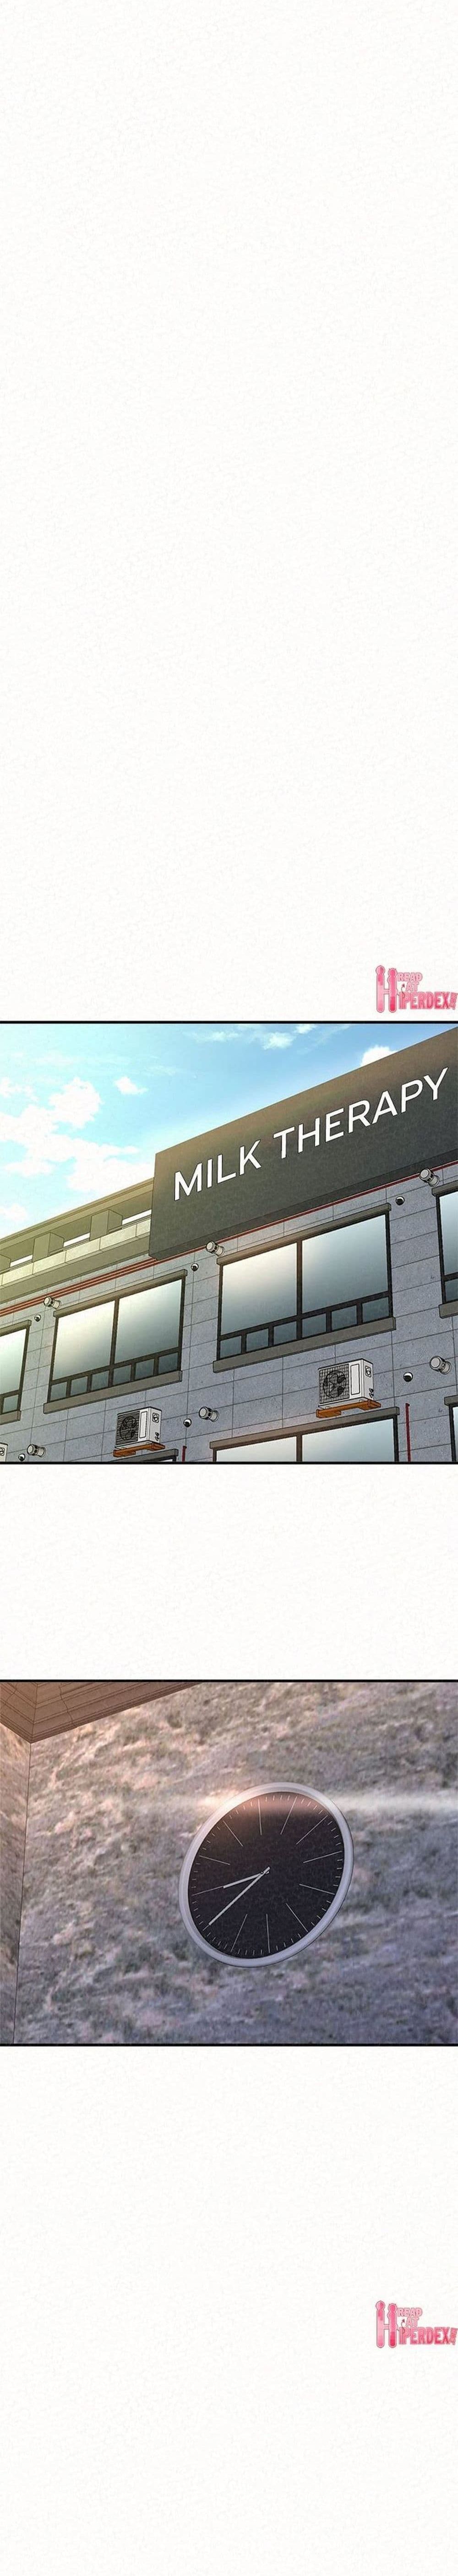 Milk Therapy 5-5